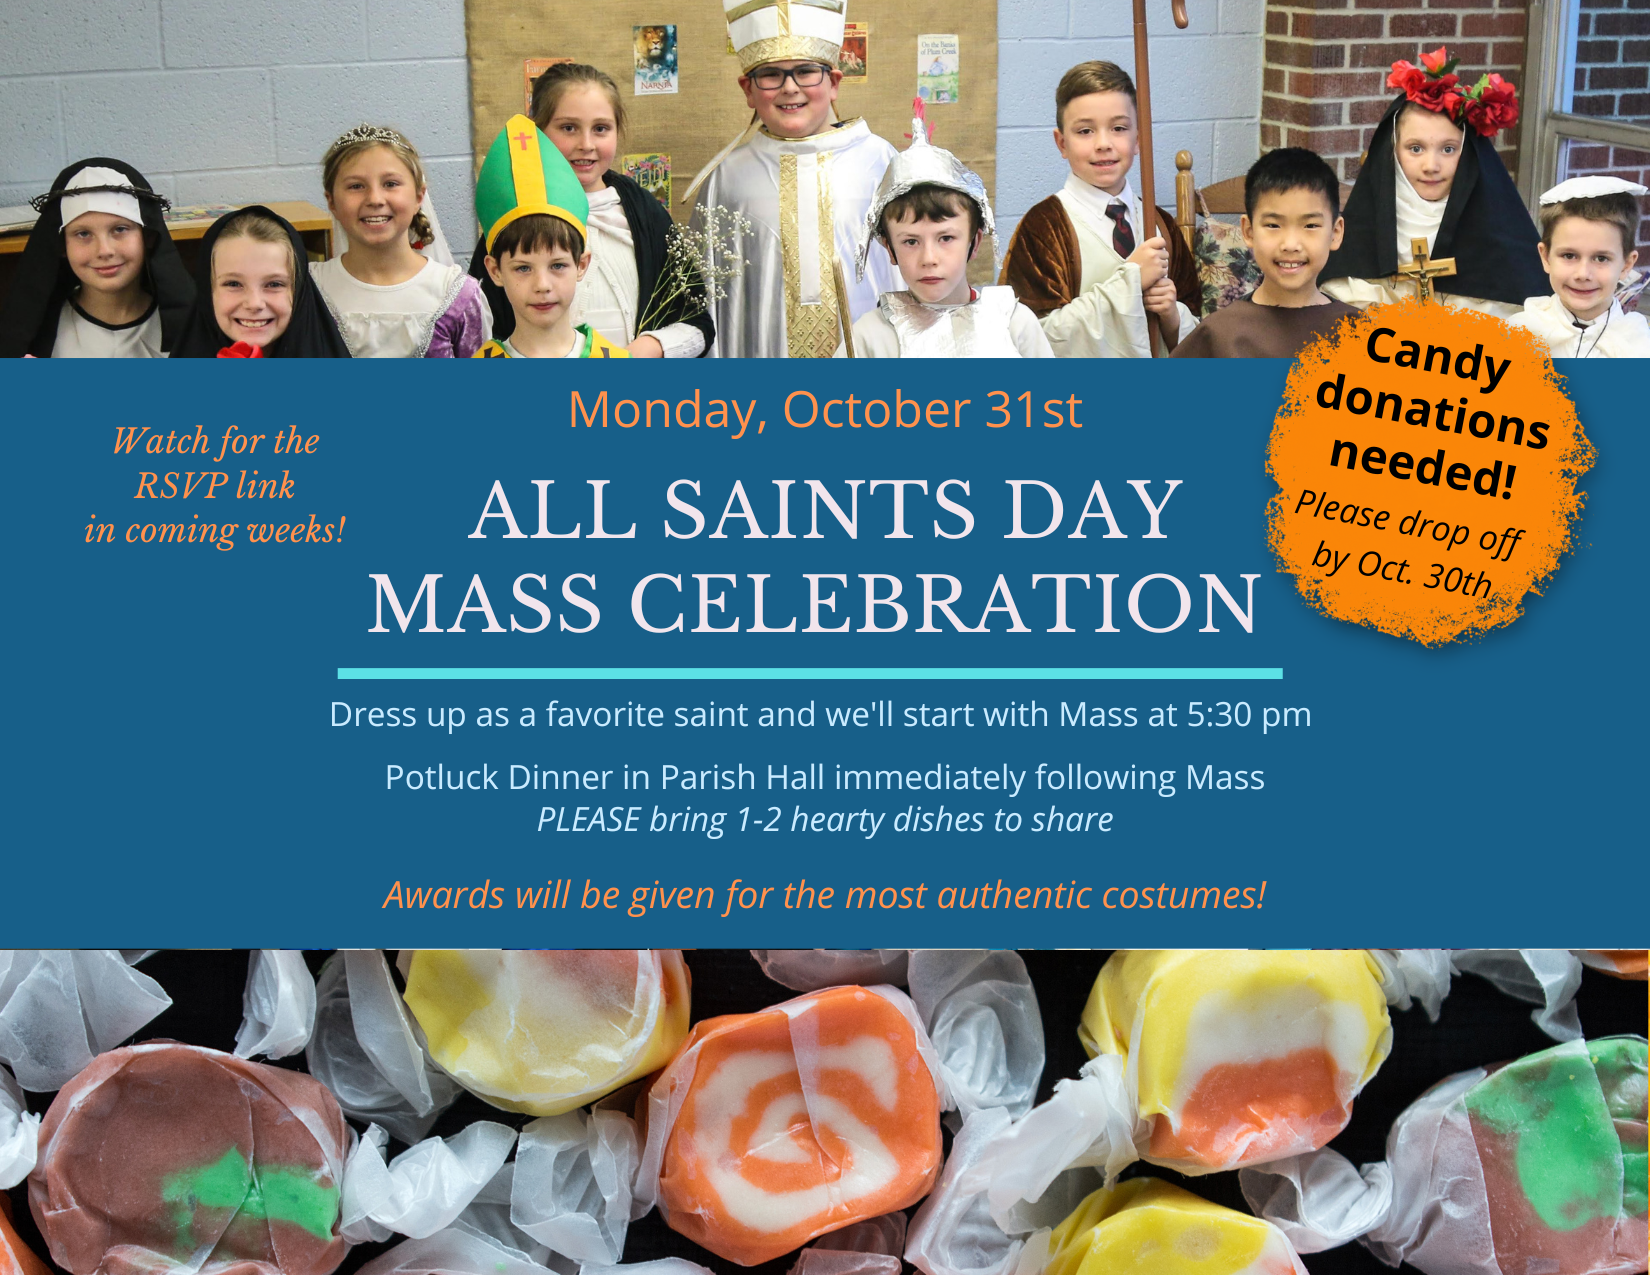 All Saints’ Eve Celebration – Candy Donations Needed!